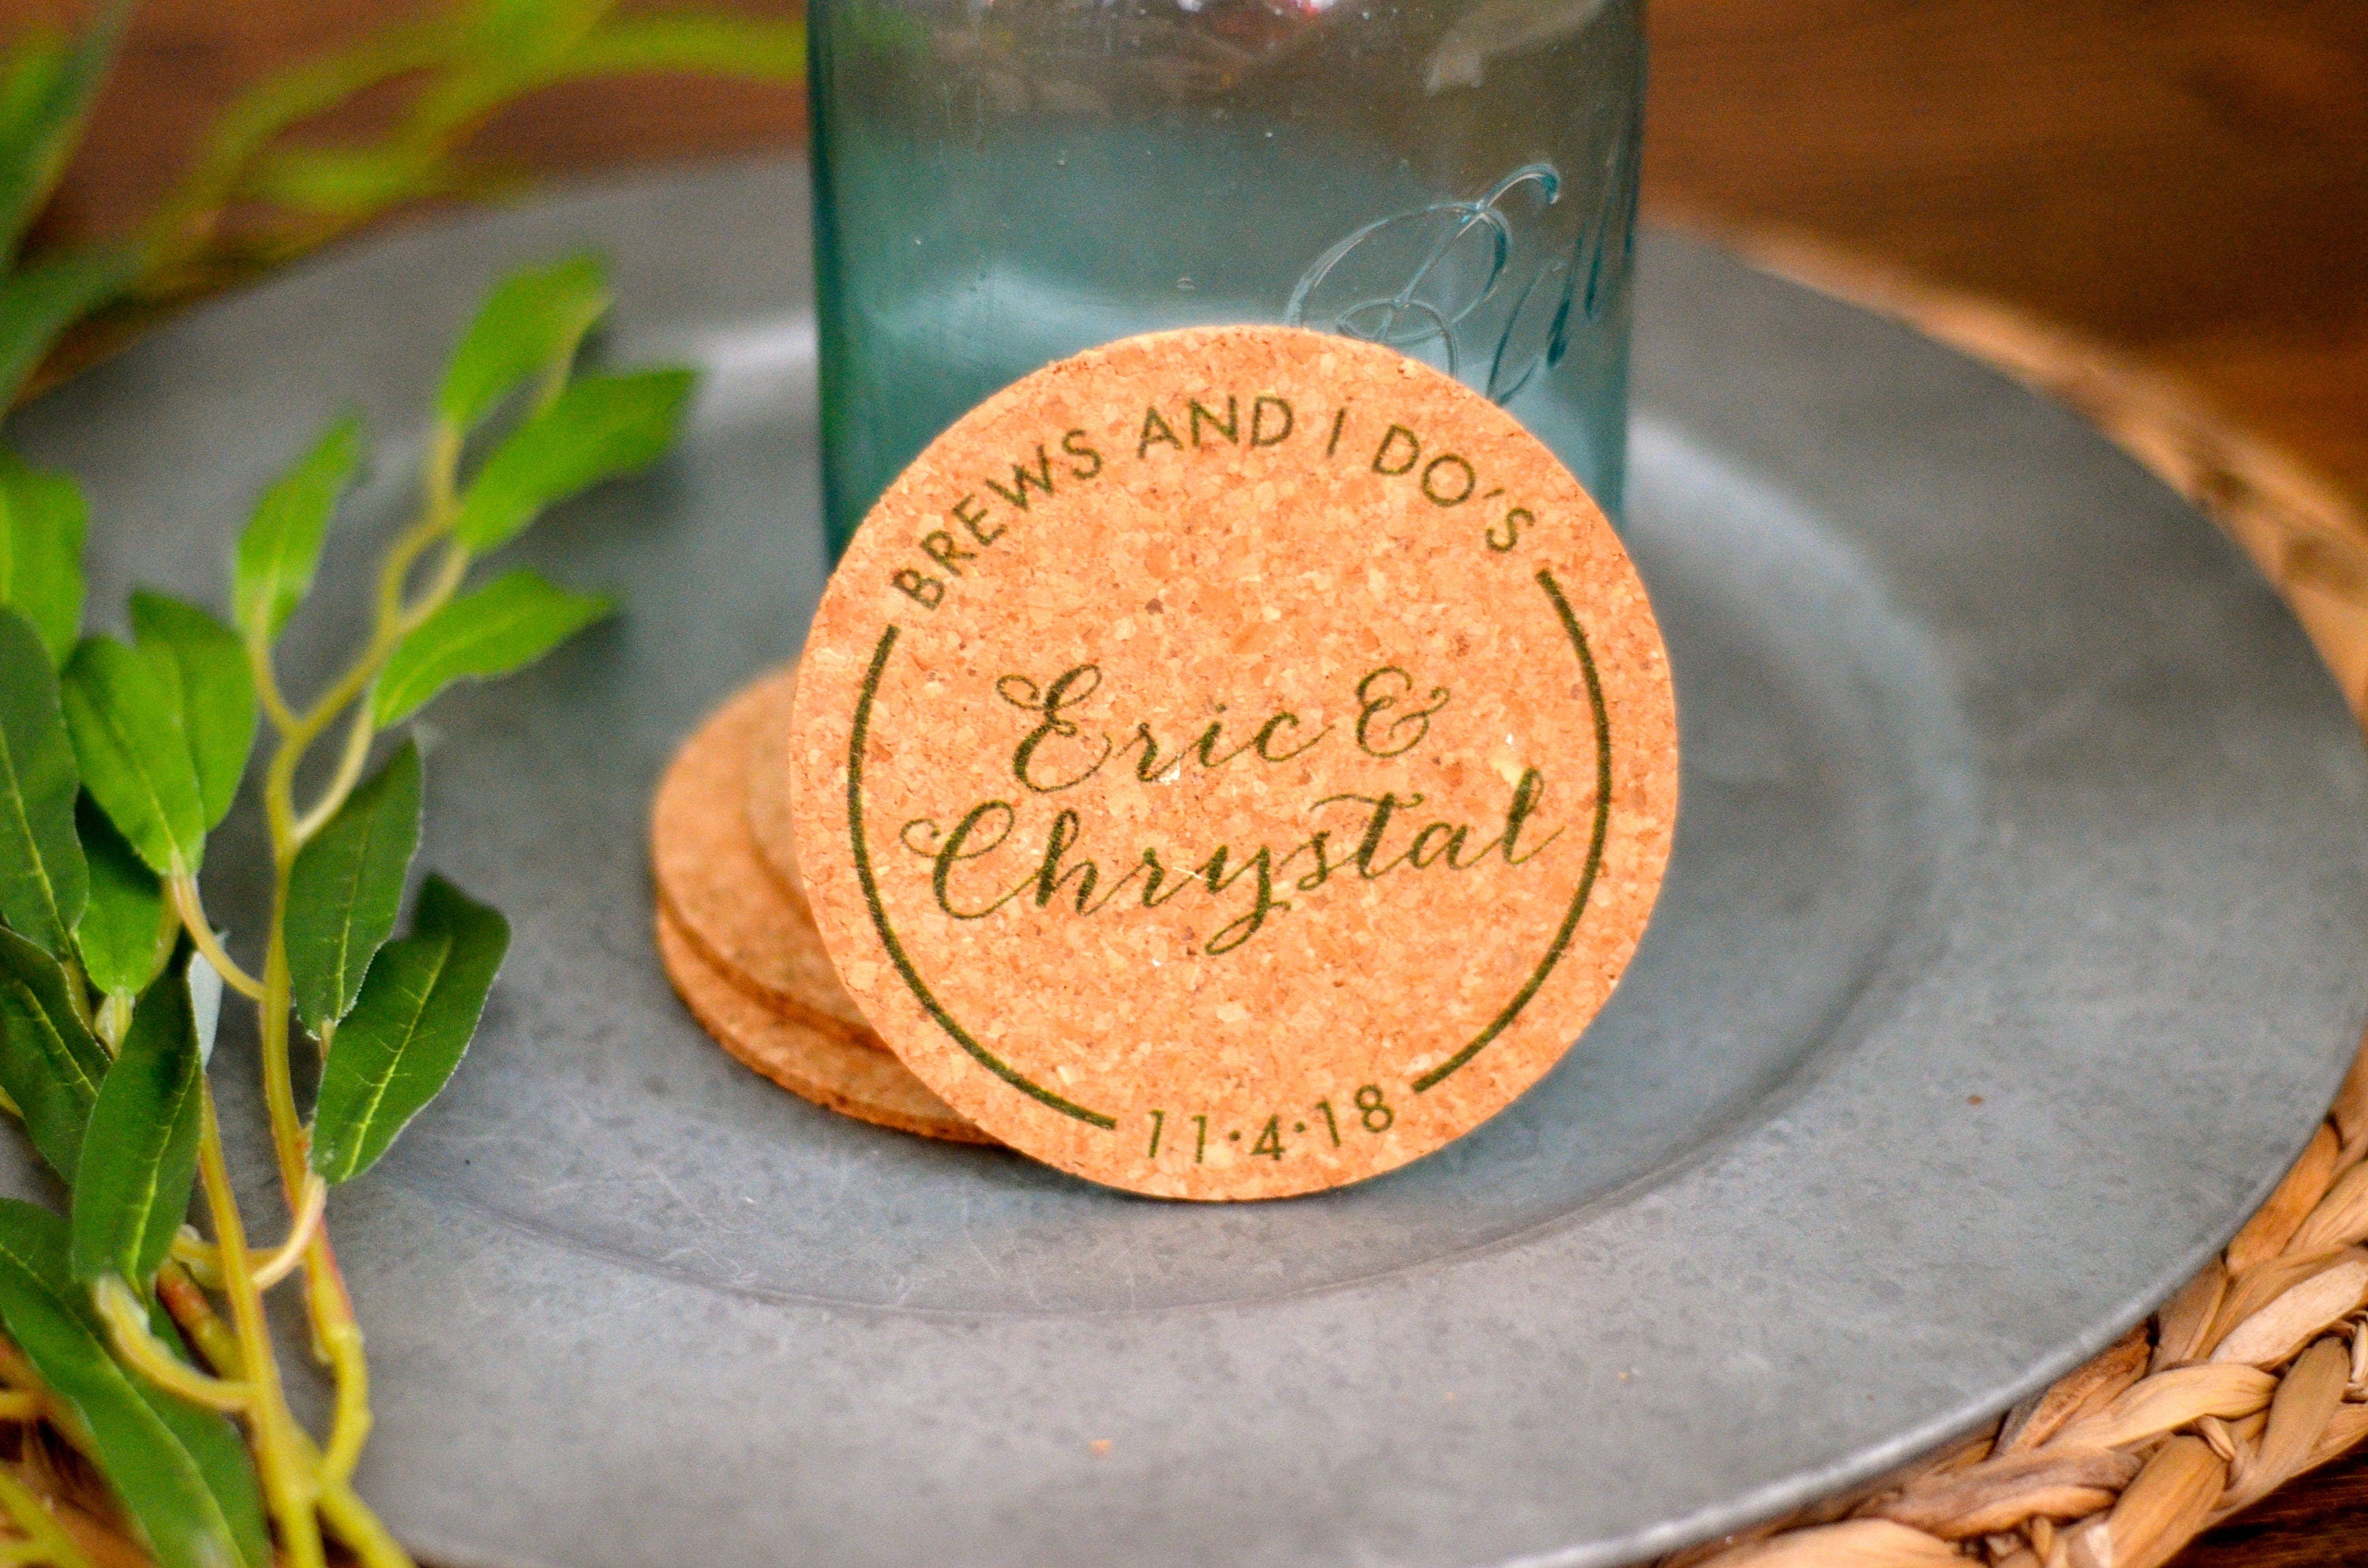 Green Brews and I Do&#39;s  Cork Coaster Wedding Favors for Guests // Distillery Wedding Favors - Personalize with Names and Date